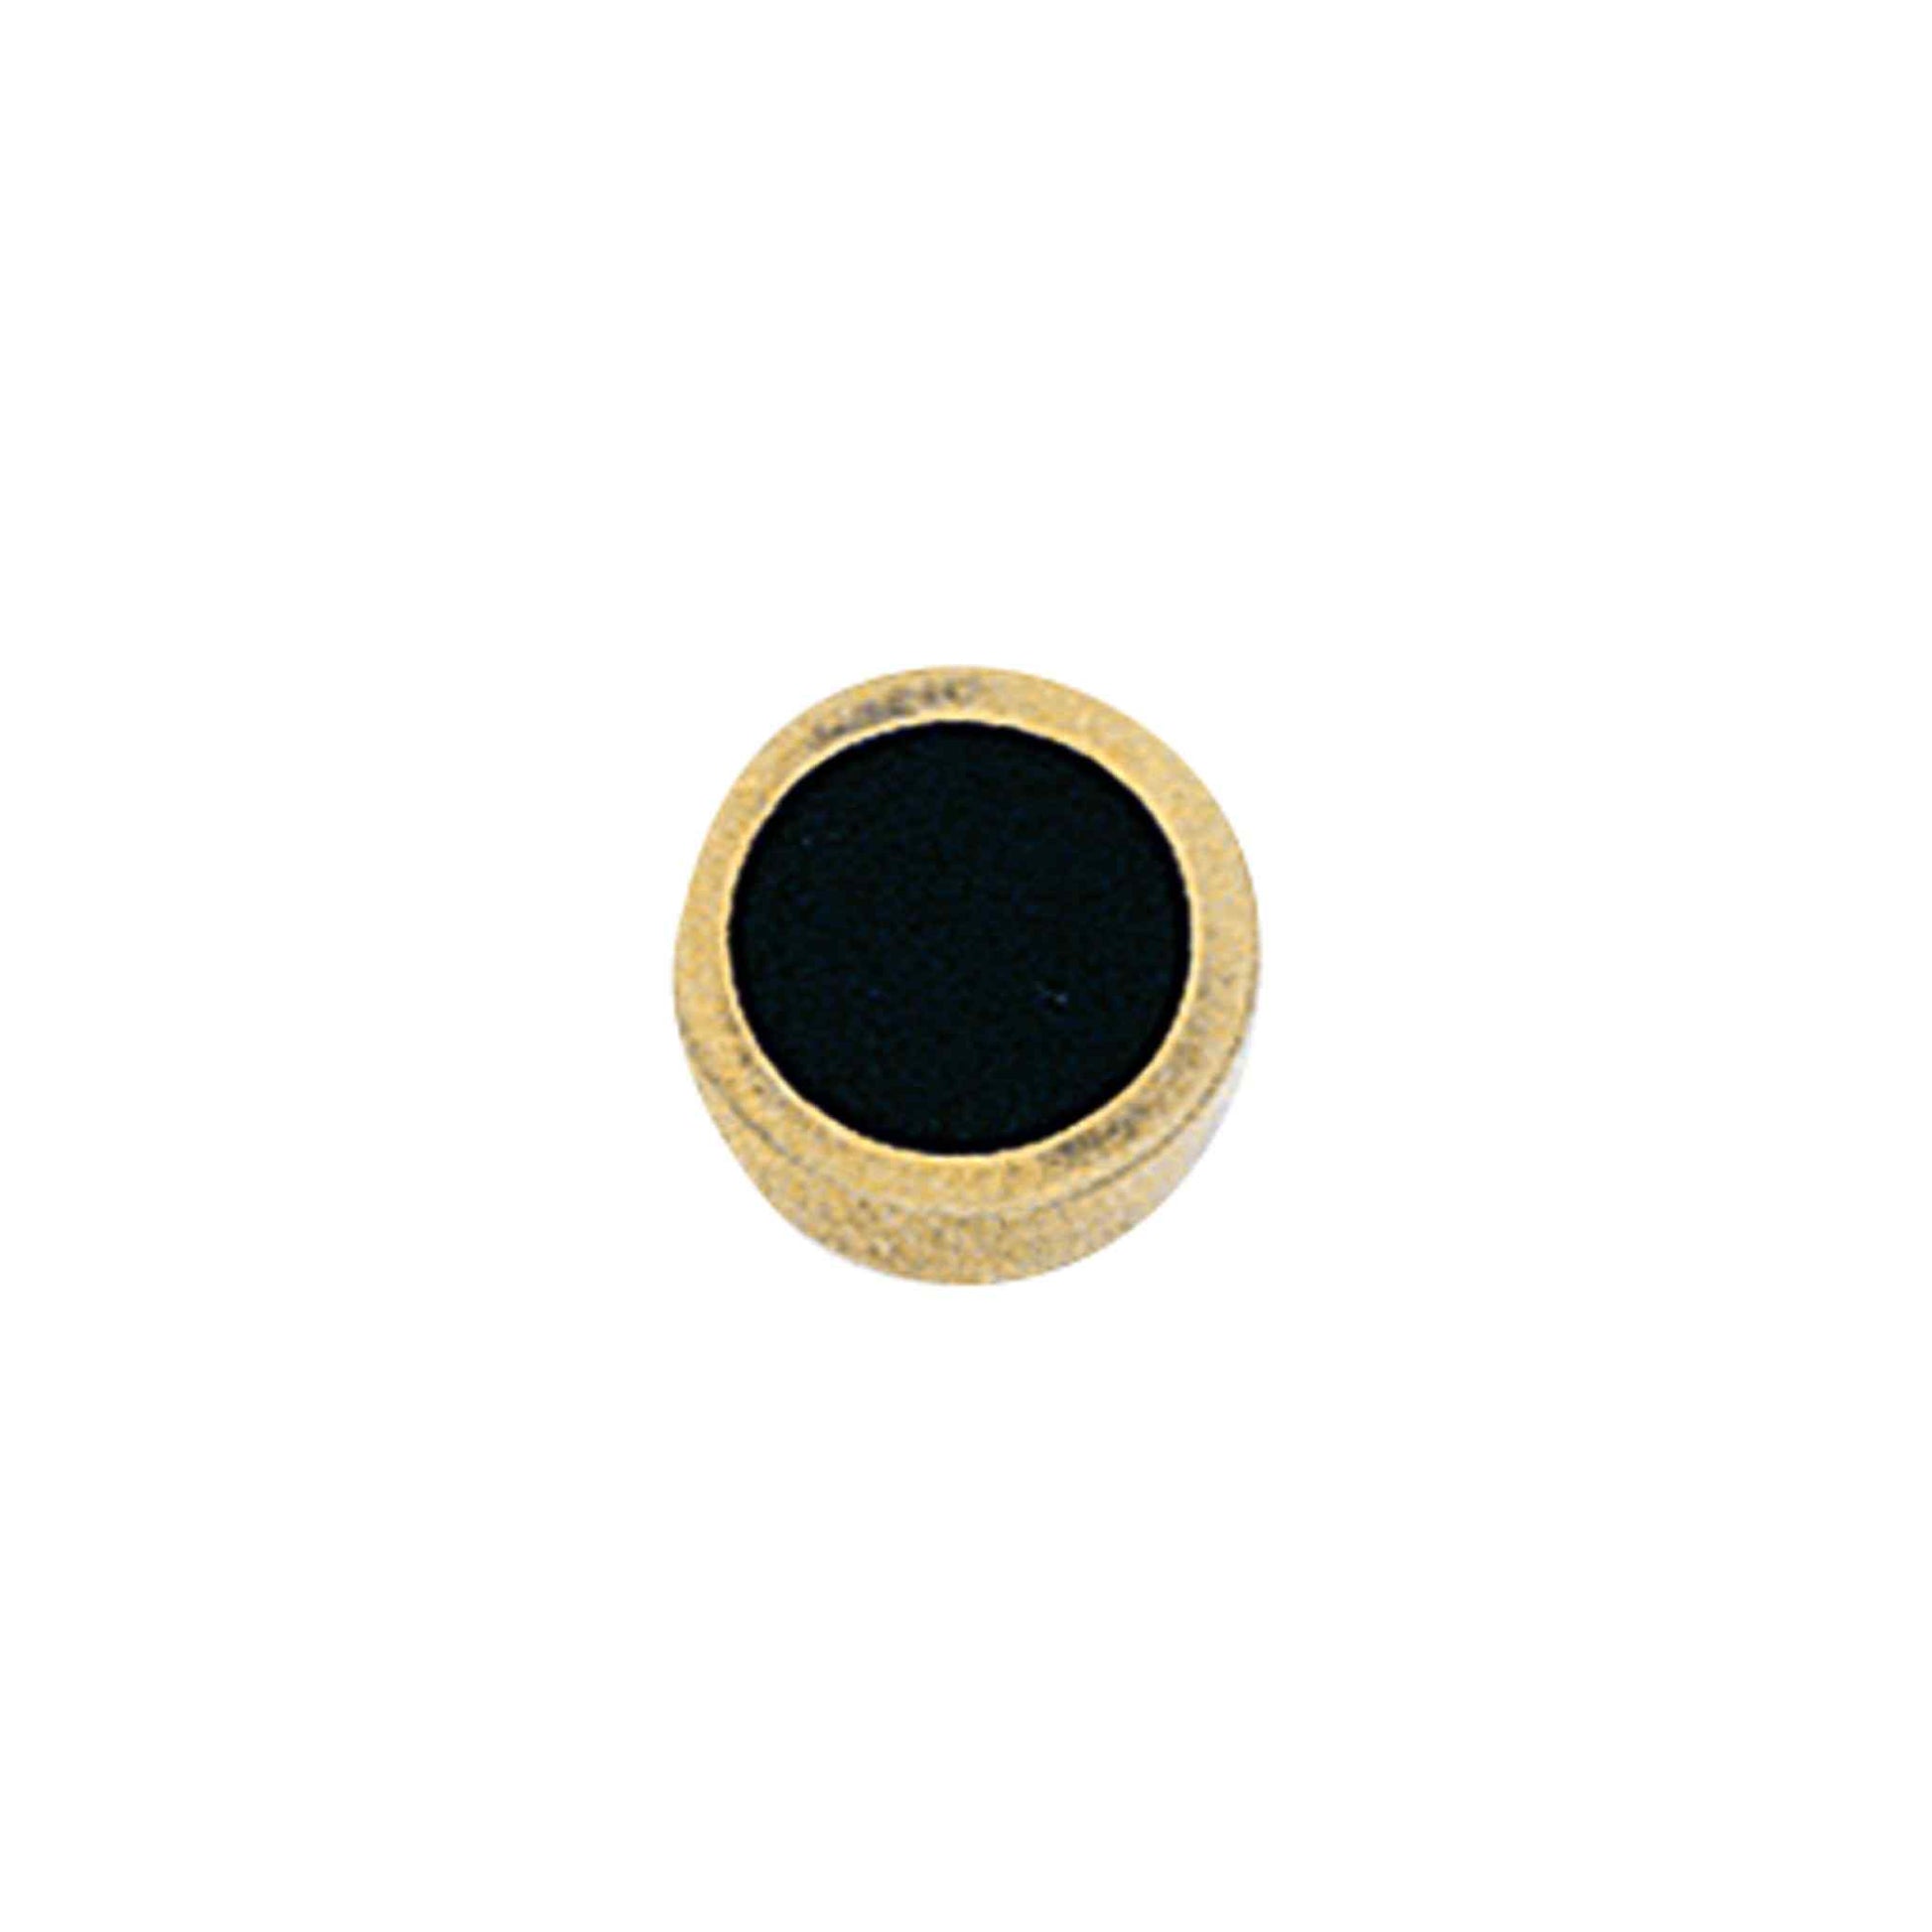 A 14k yellow gold round 9mm onyx tie tack displayed on a neutral white background.